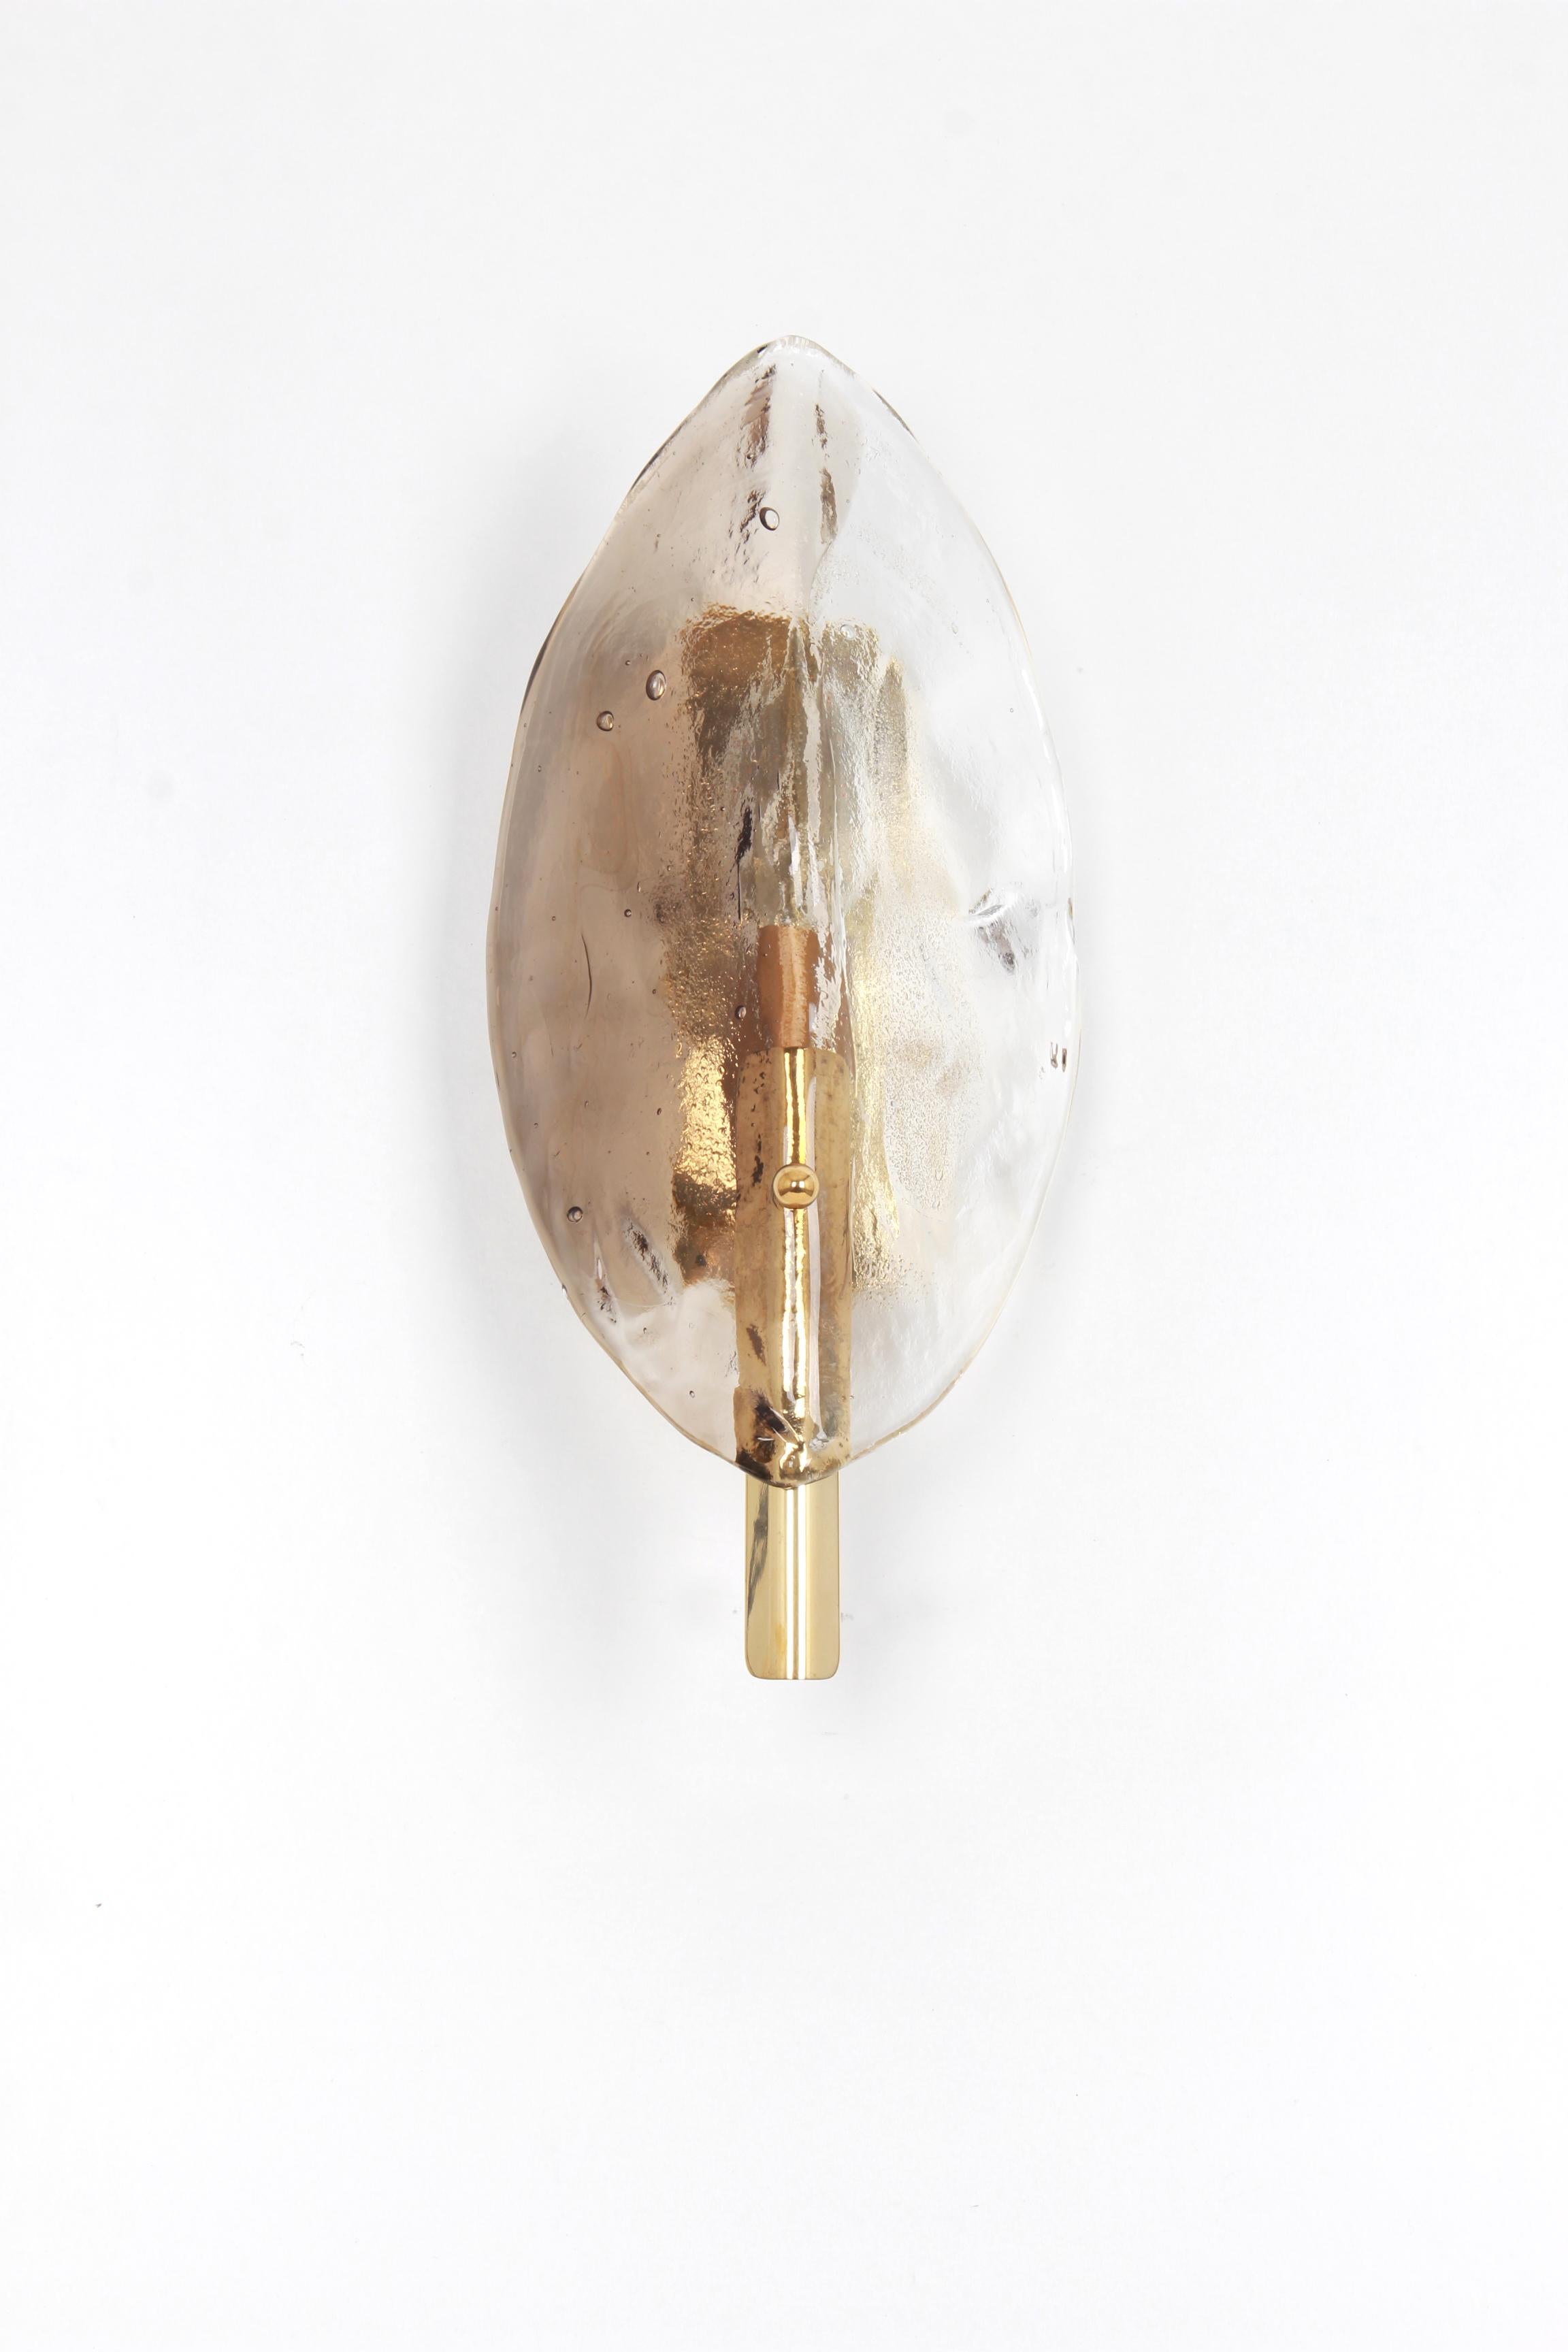 Wonderful midcentury wall sconce with handcrafted Smoked Murano glass piece on a brass base, made by J.T.Kalmar, Austria, manufactured, circa 1960-1969.

High quality and in very good condition. Cleaned, well-wired and ready to use. 

The